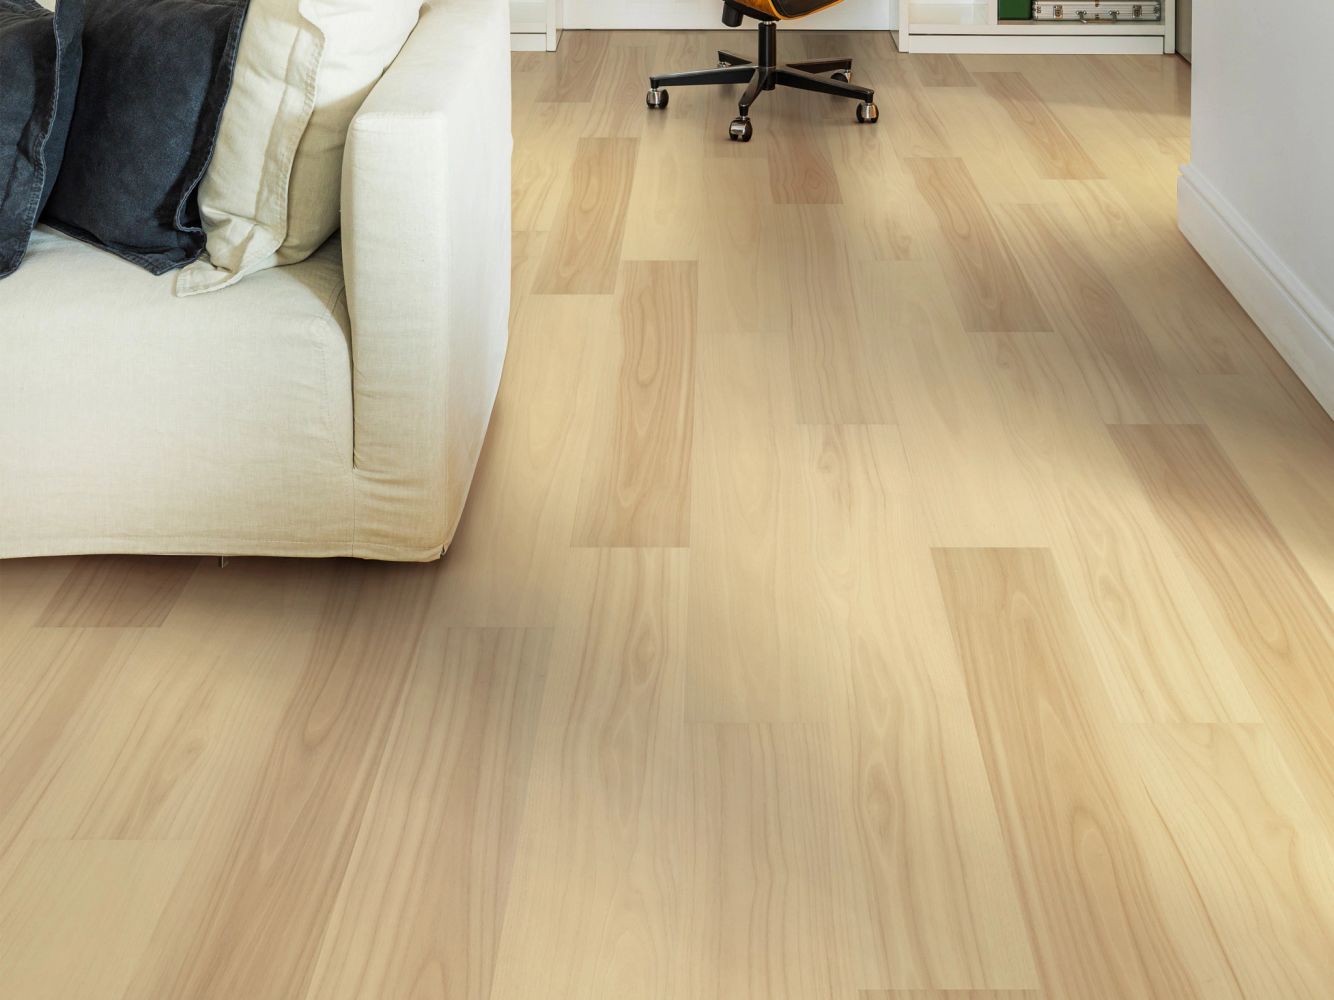 Shaw Floors Resilient Residential Pantheon Hd+ Natural Bevel Marzipan 02044_1051V